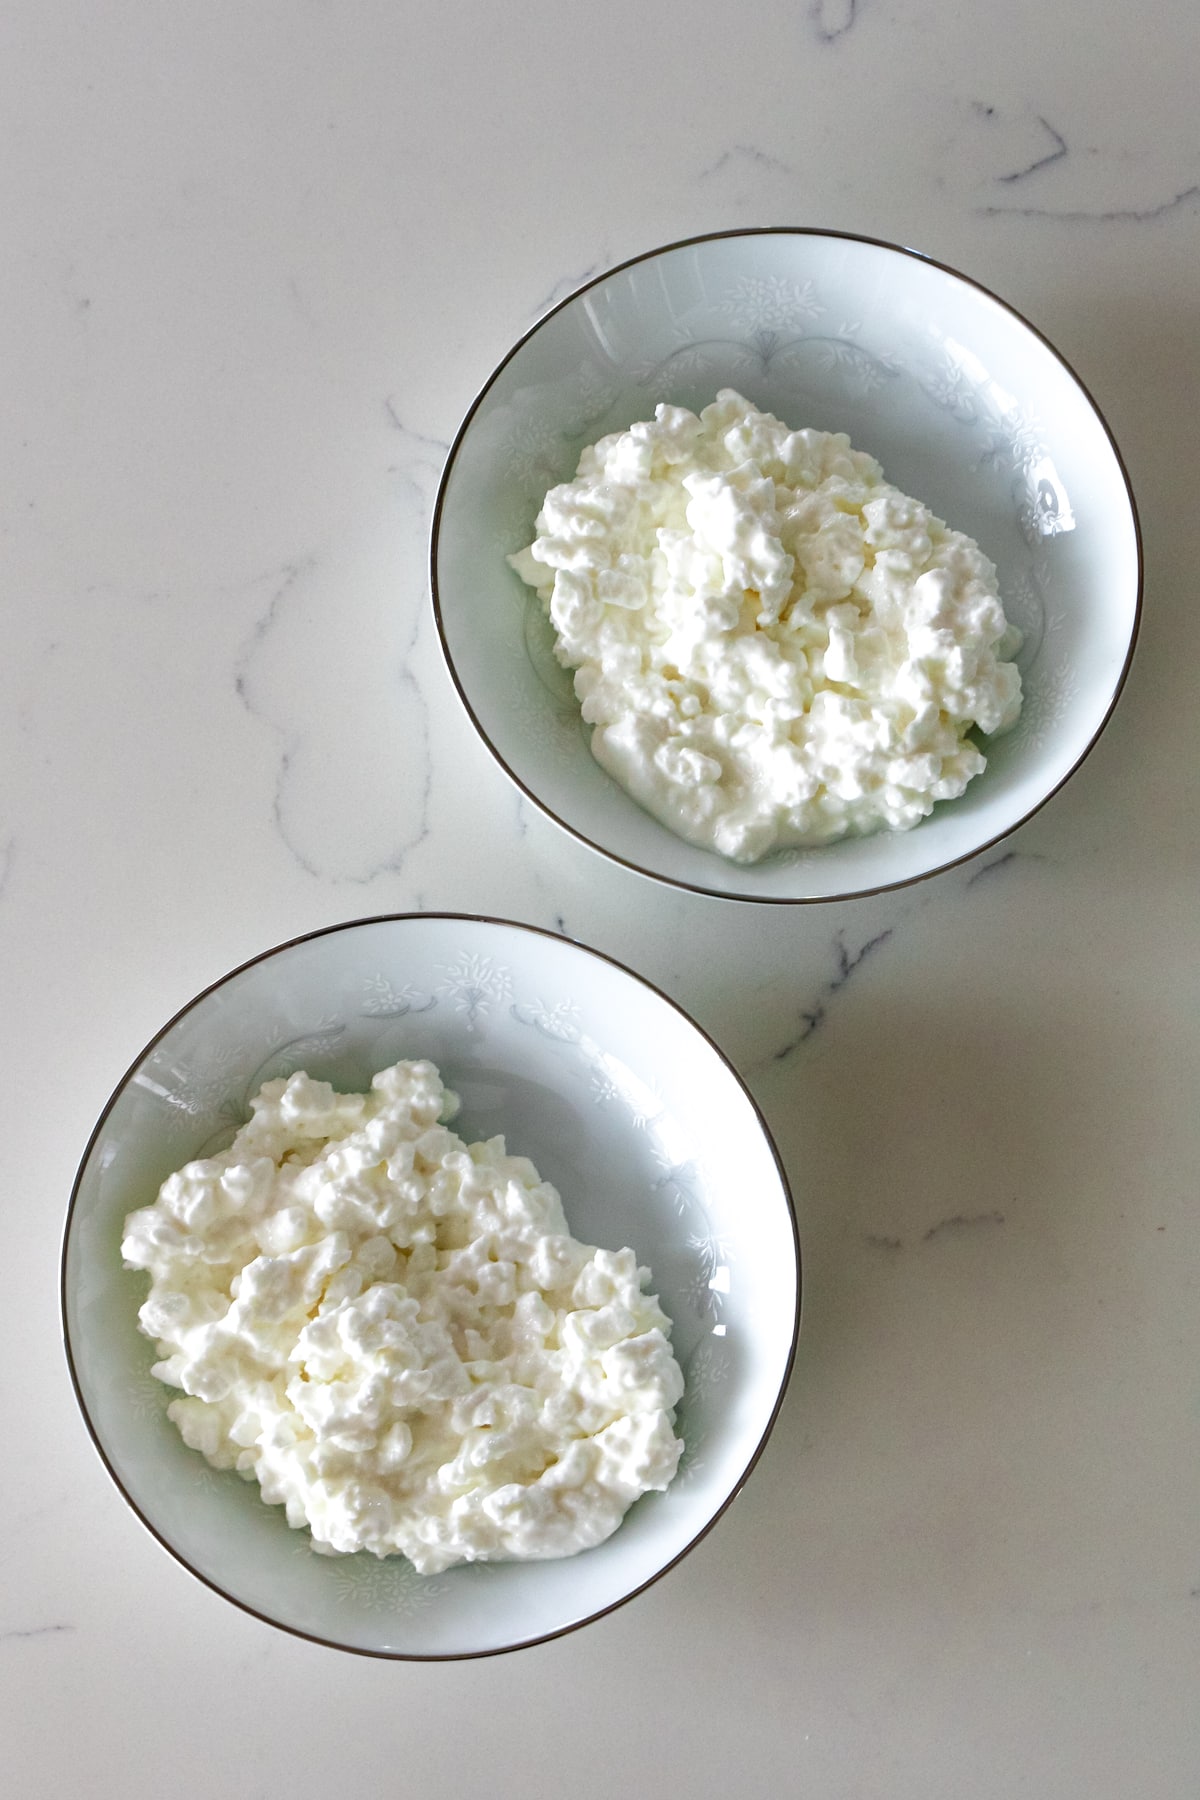 two small bowls full of large curd unblended cottage cheese.